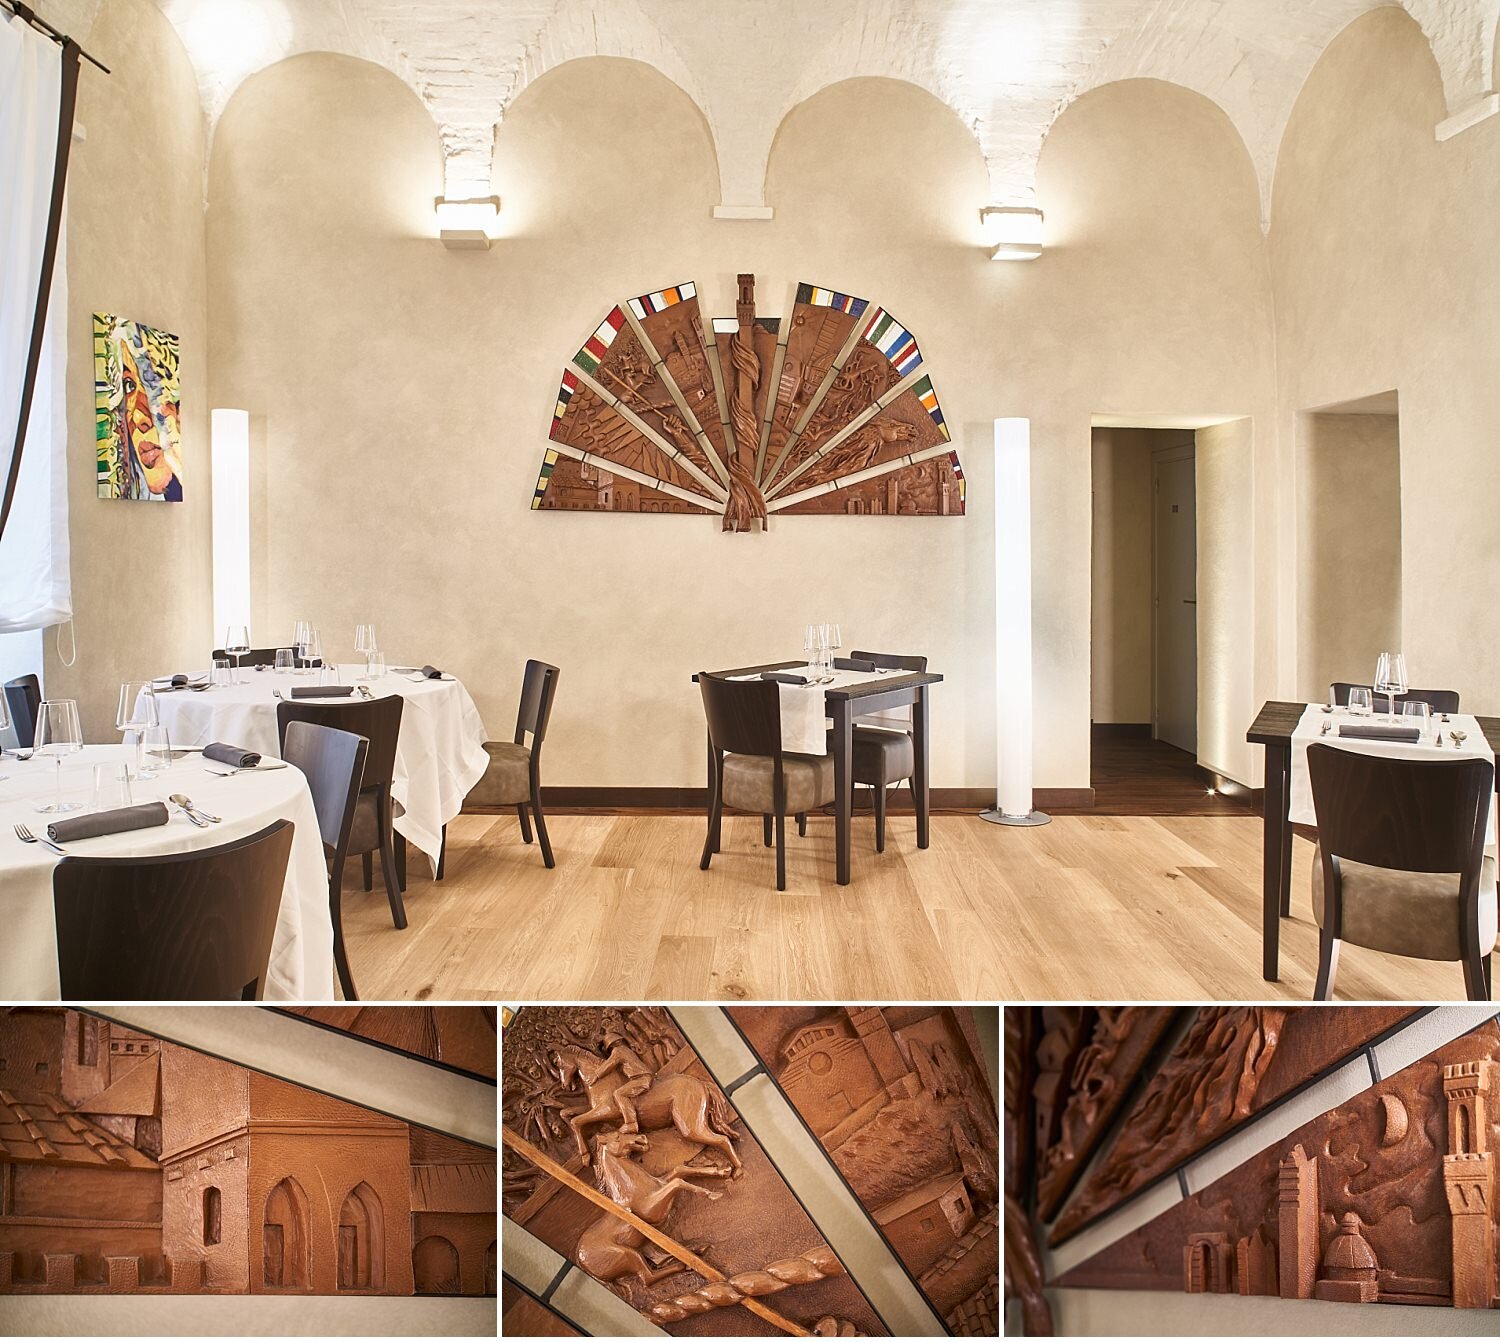  Historic Siena restaurant, renovated and refurbished by a new owner. The kitchen was entrusted to Senio Venturi, starred chef with a Michelin star of the restaurant L'Asinello di Villa a Sesta in the heart of Chianti. The restaurant is located in th